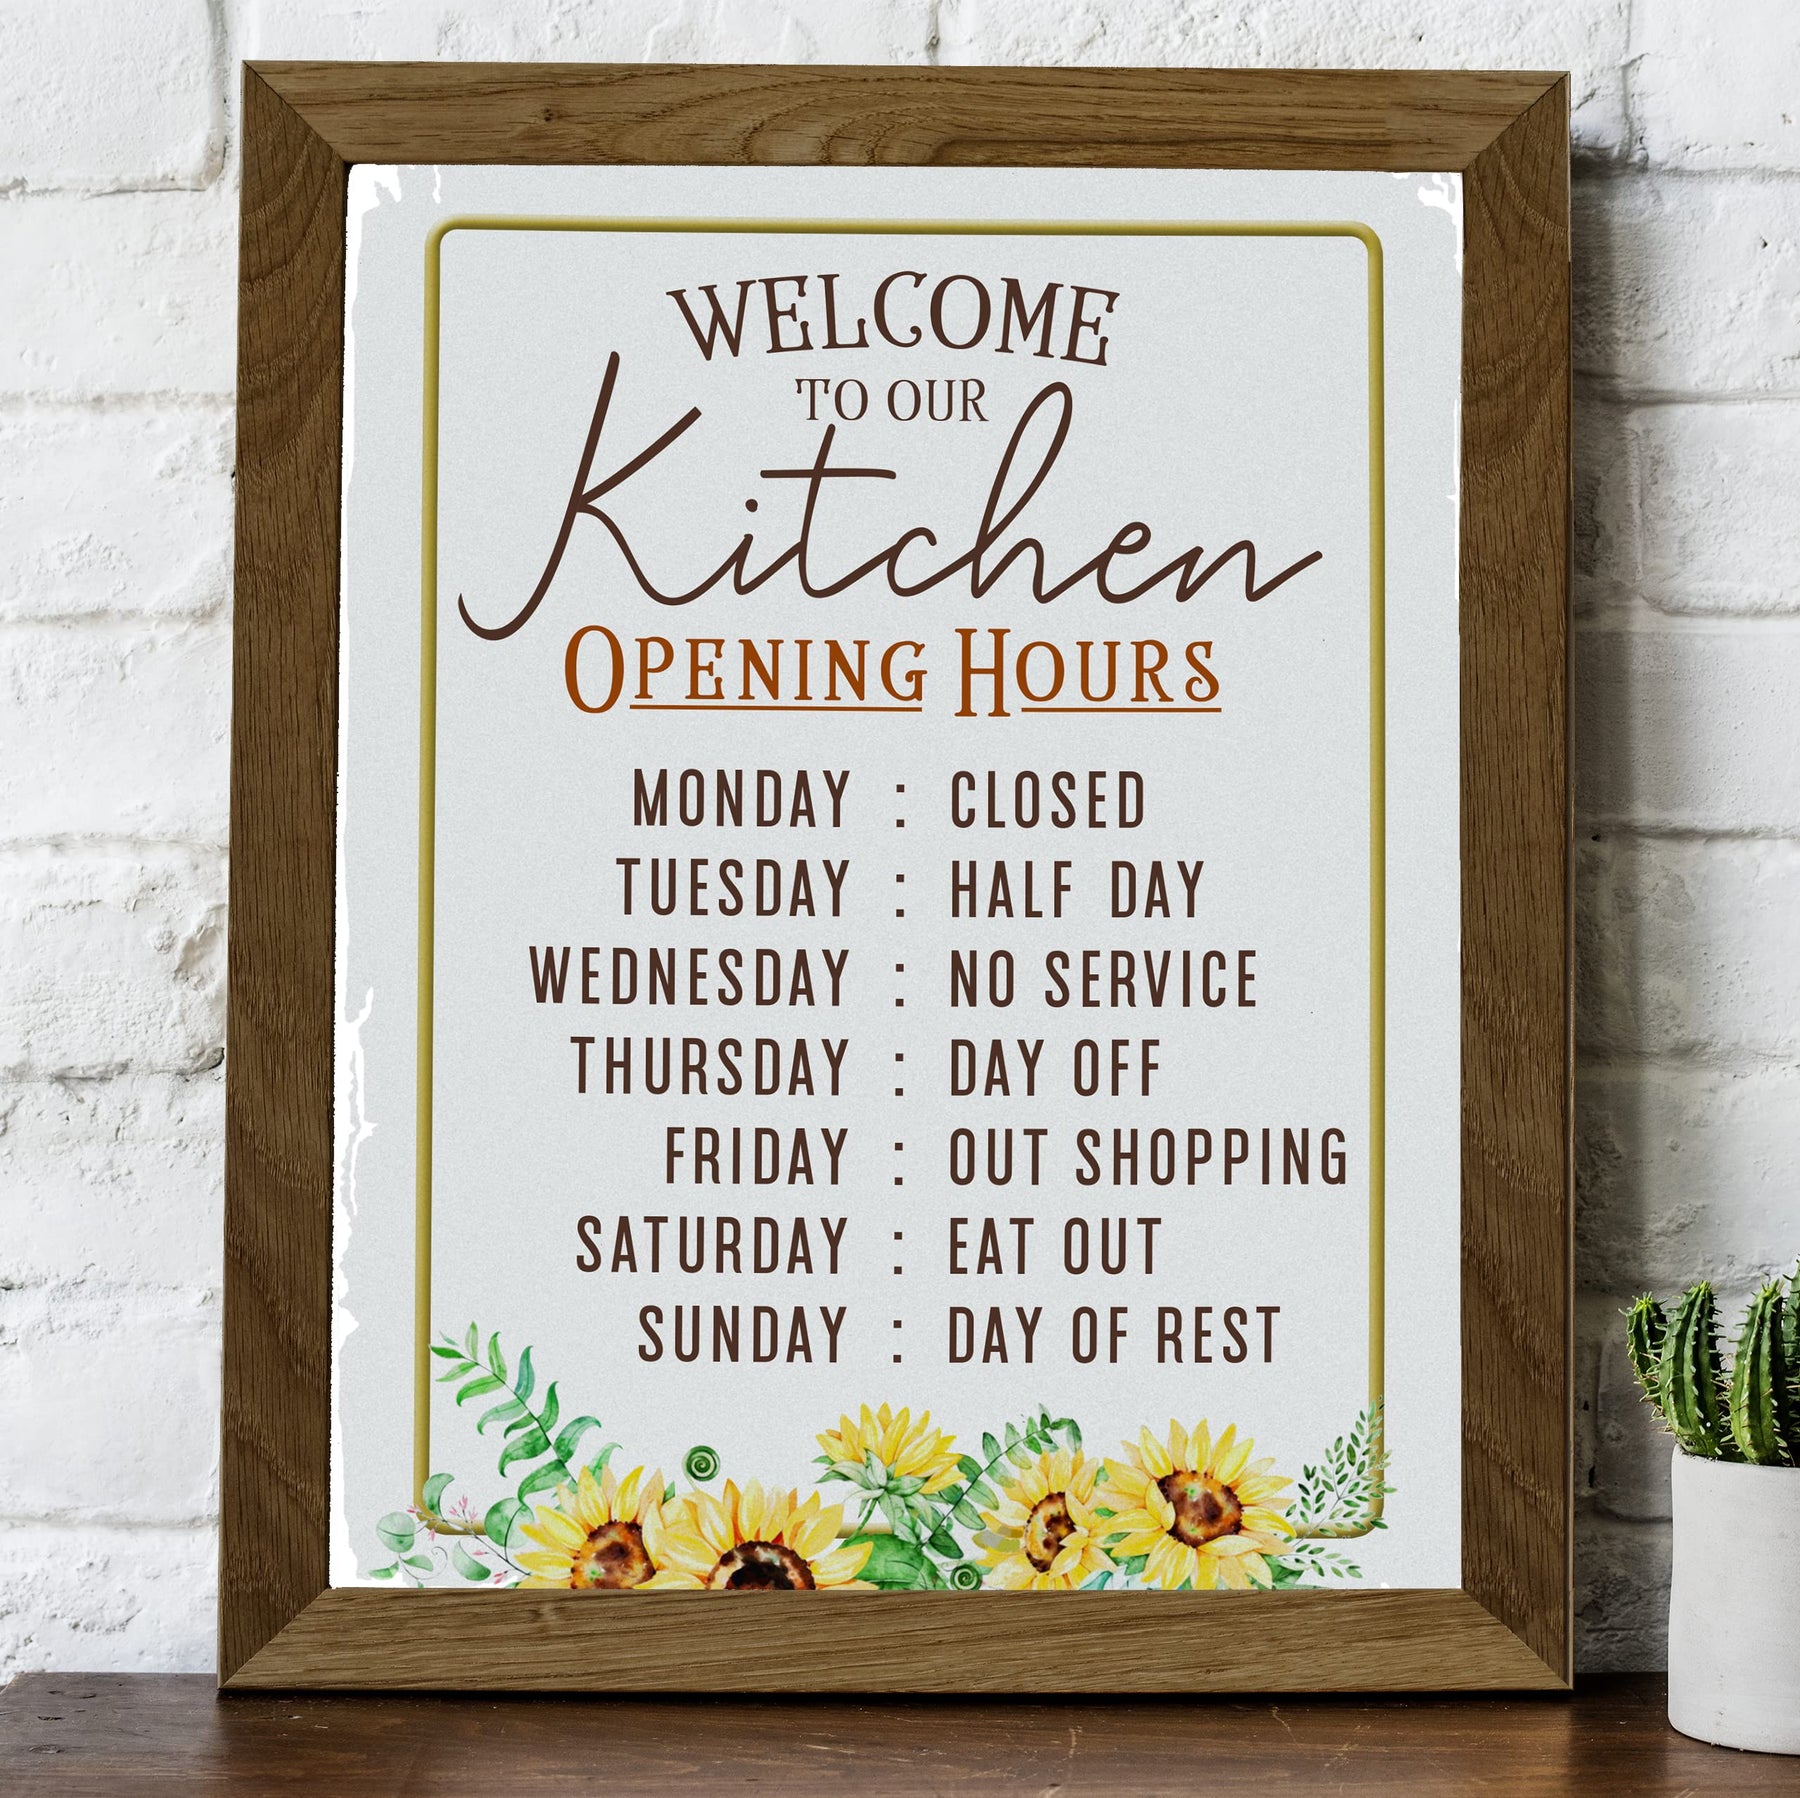 11 Kitchen Opening Hours Tabletop Sign by Ashland®